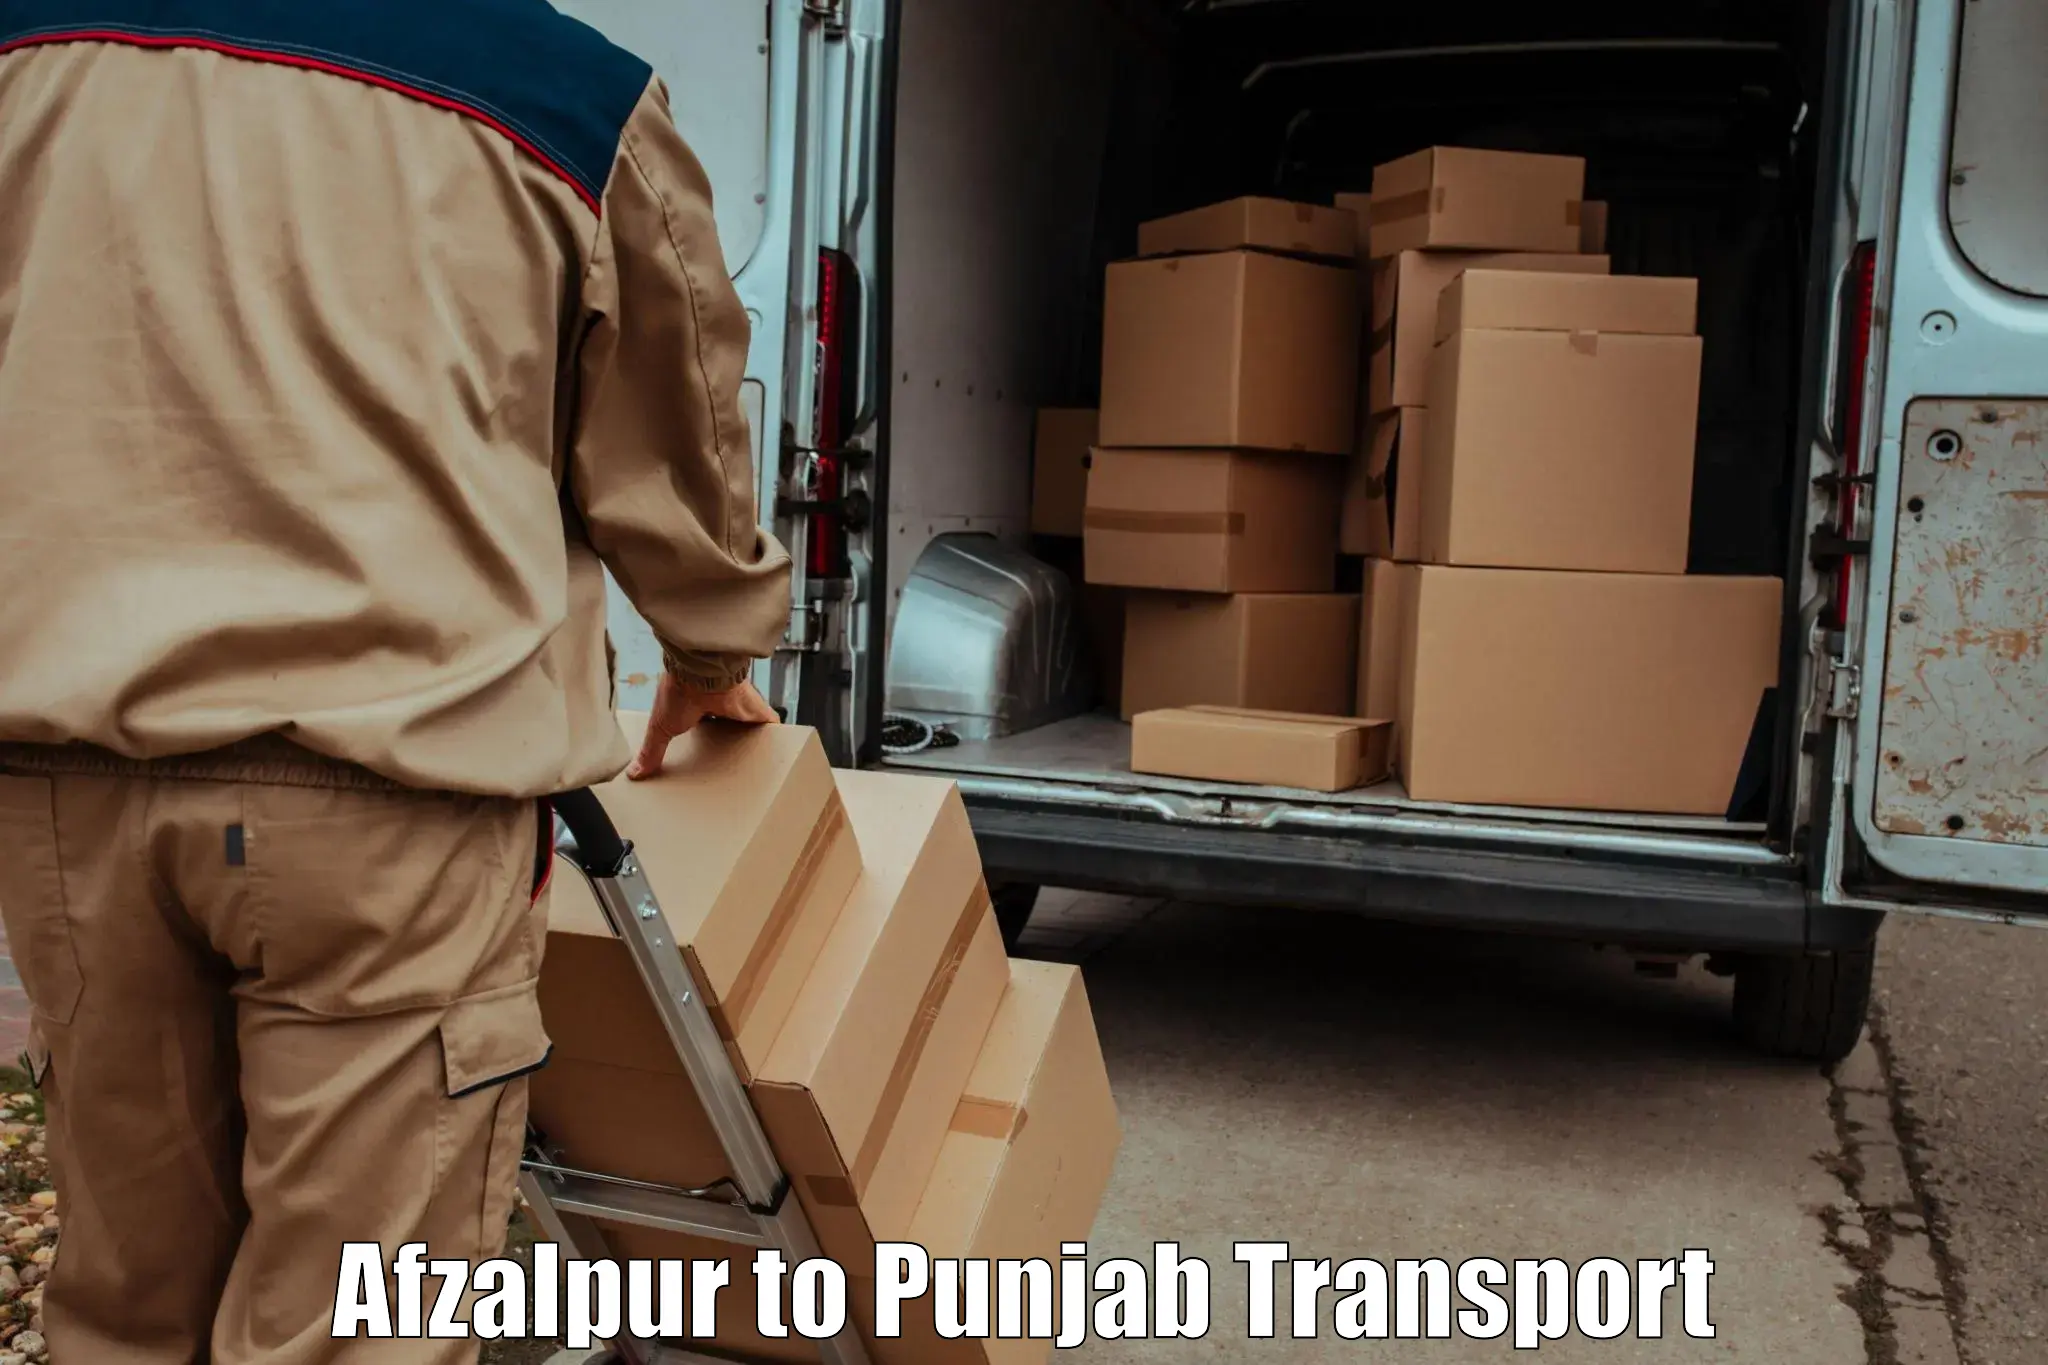 Road transport online services in Afzalpur to Amritsar